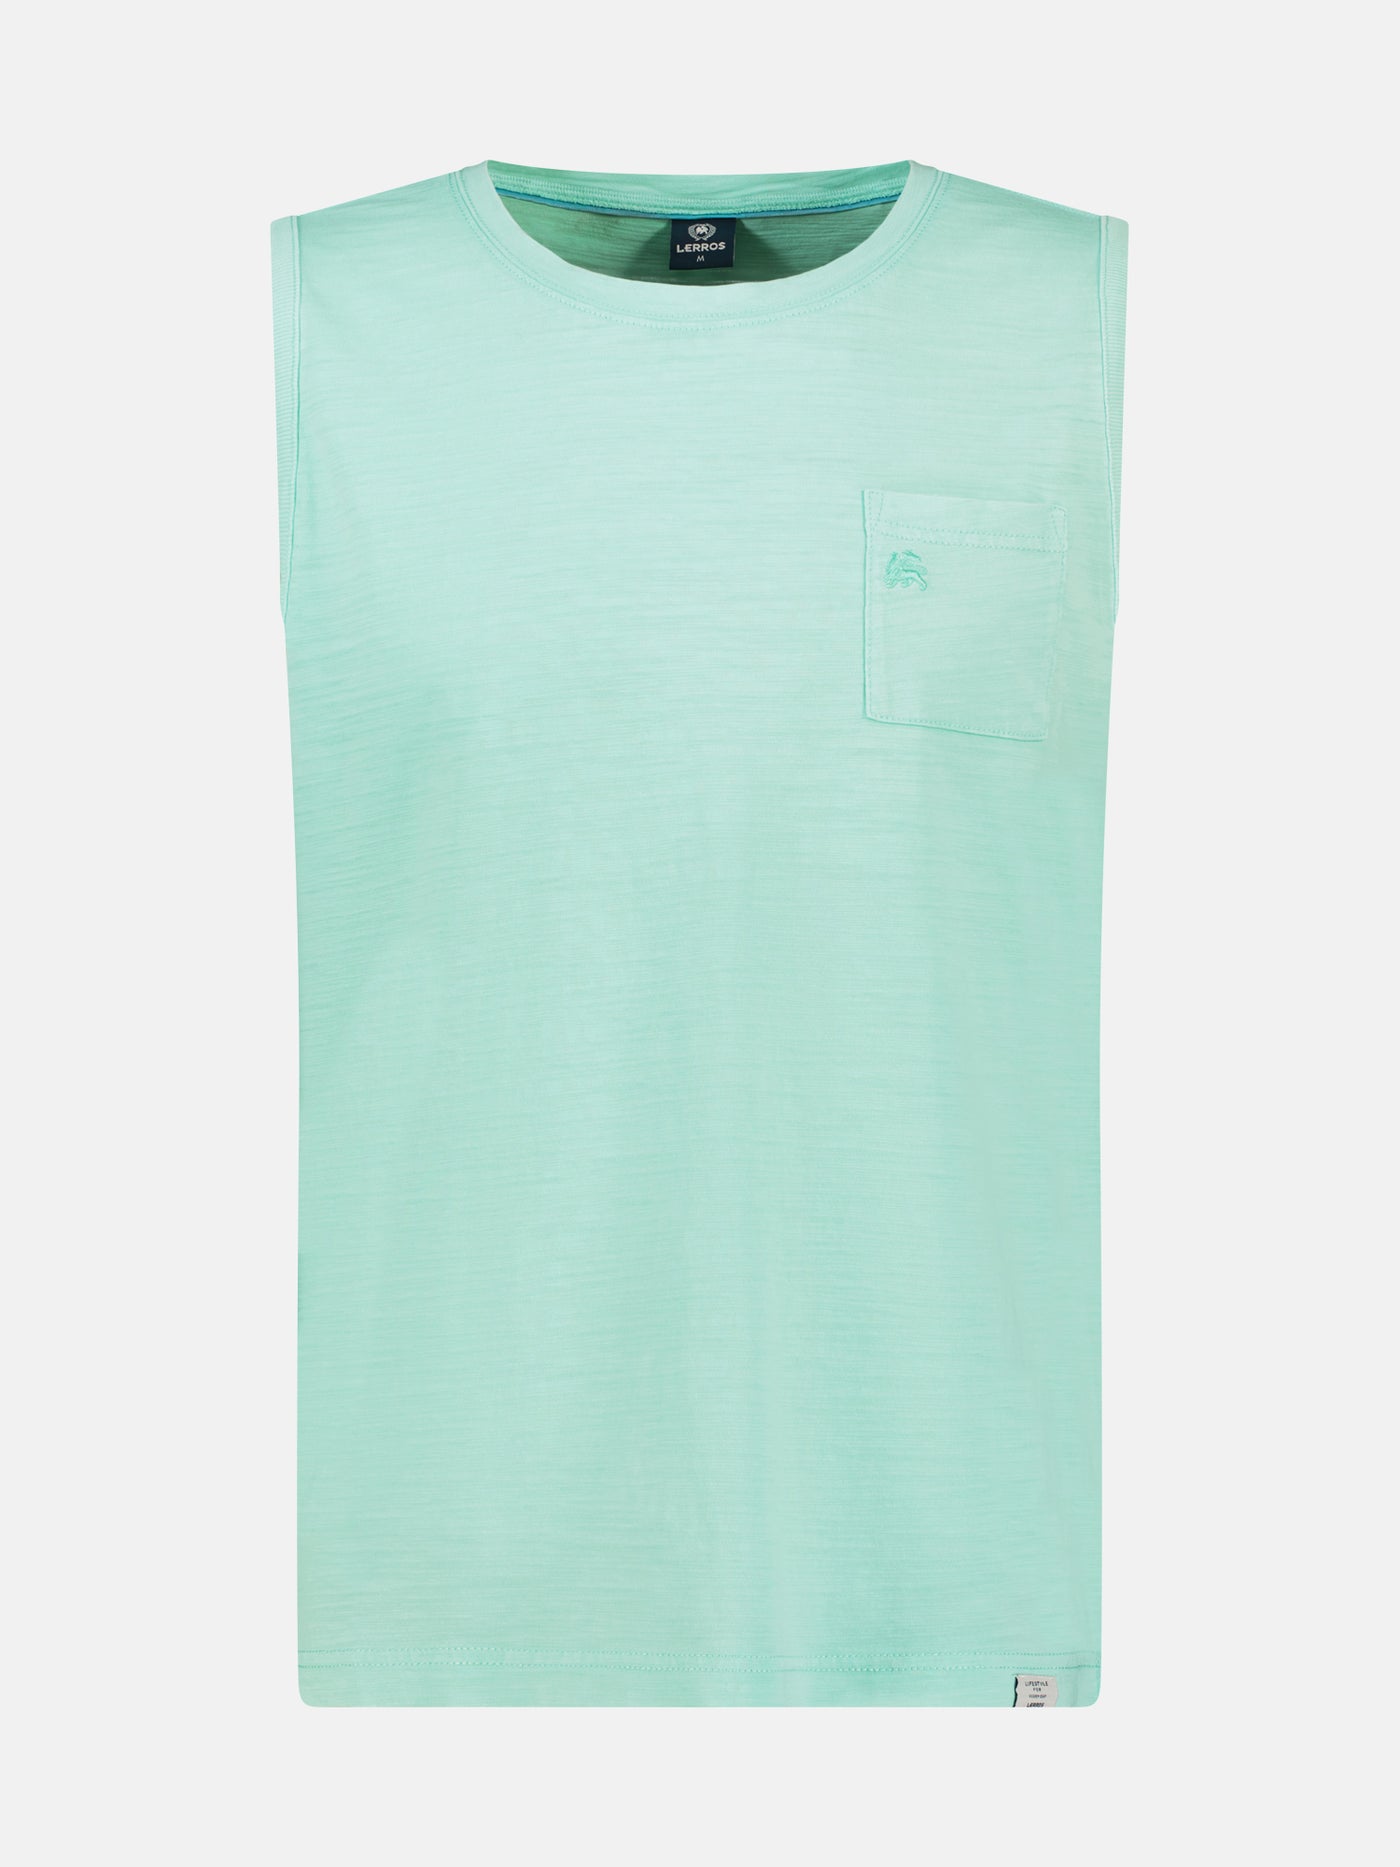 Comfortable tank top with chest pocket